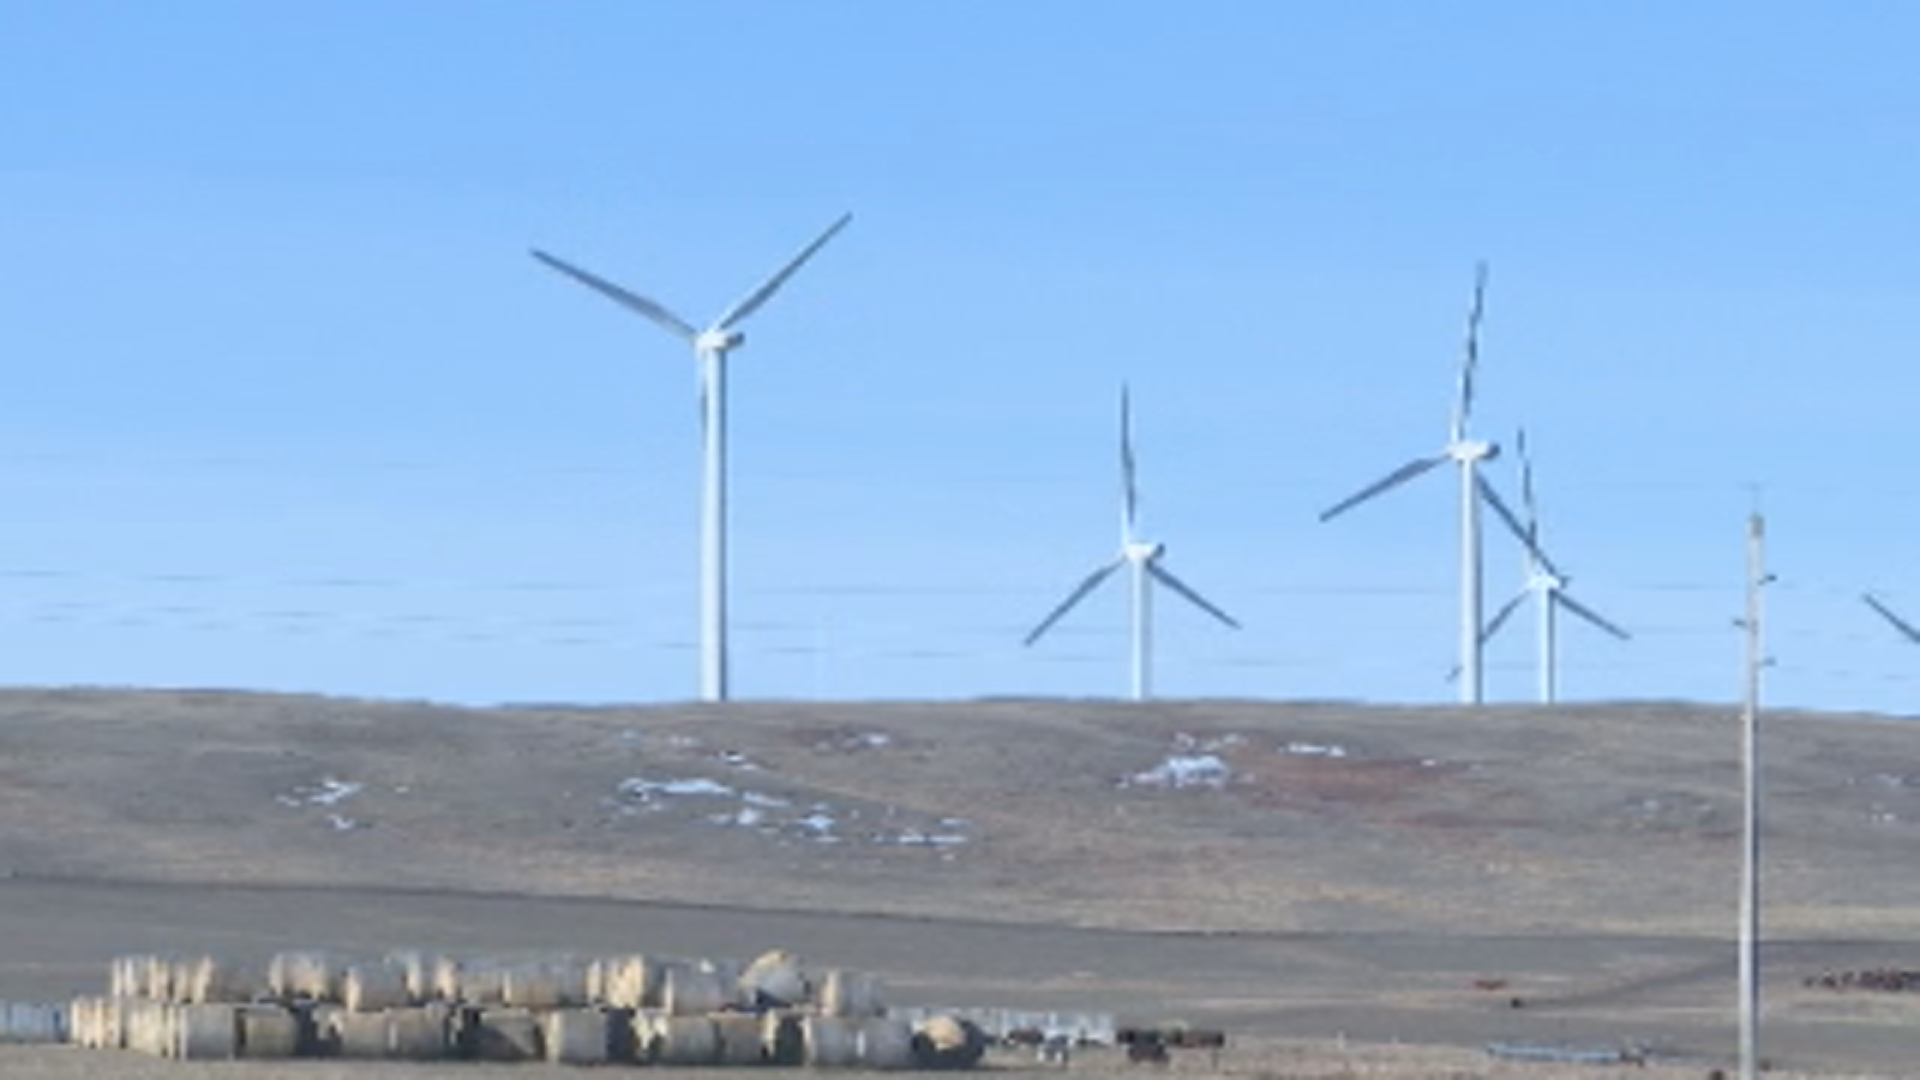 Research enhances safety in wind industry